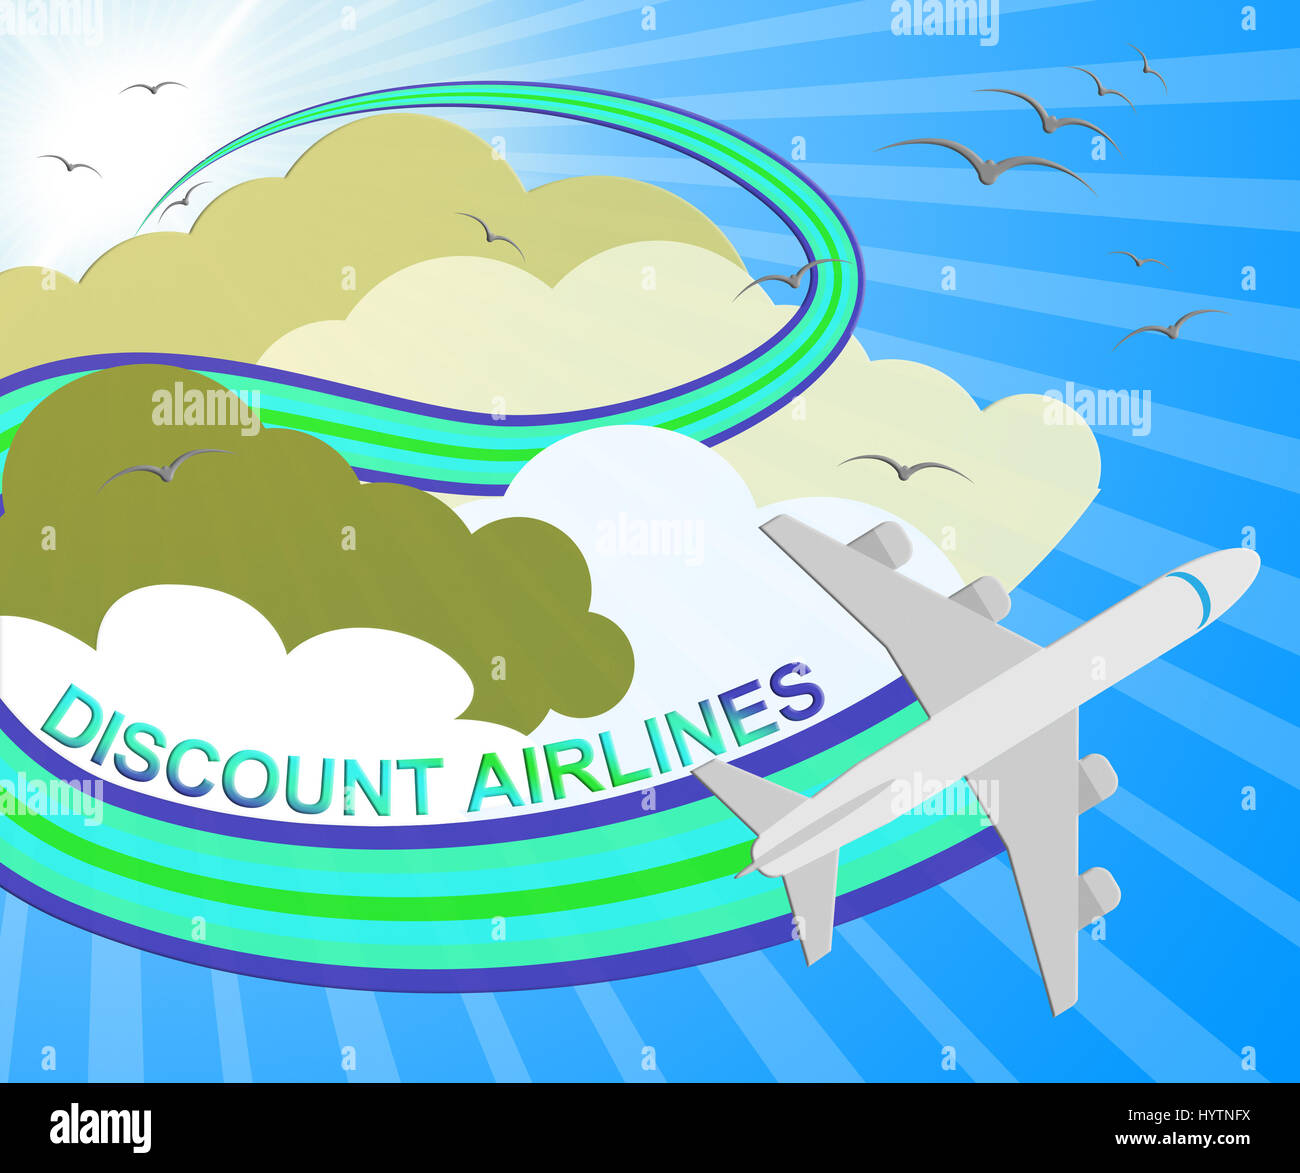 Discount Airlines Plane Showing Special Offer Flights 3d Illustration Stock Photo